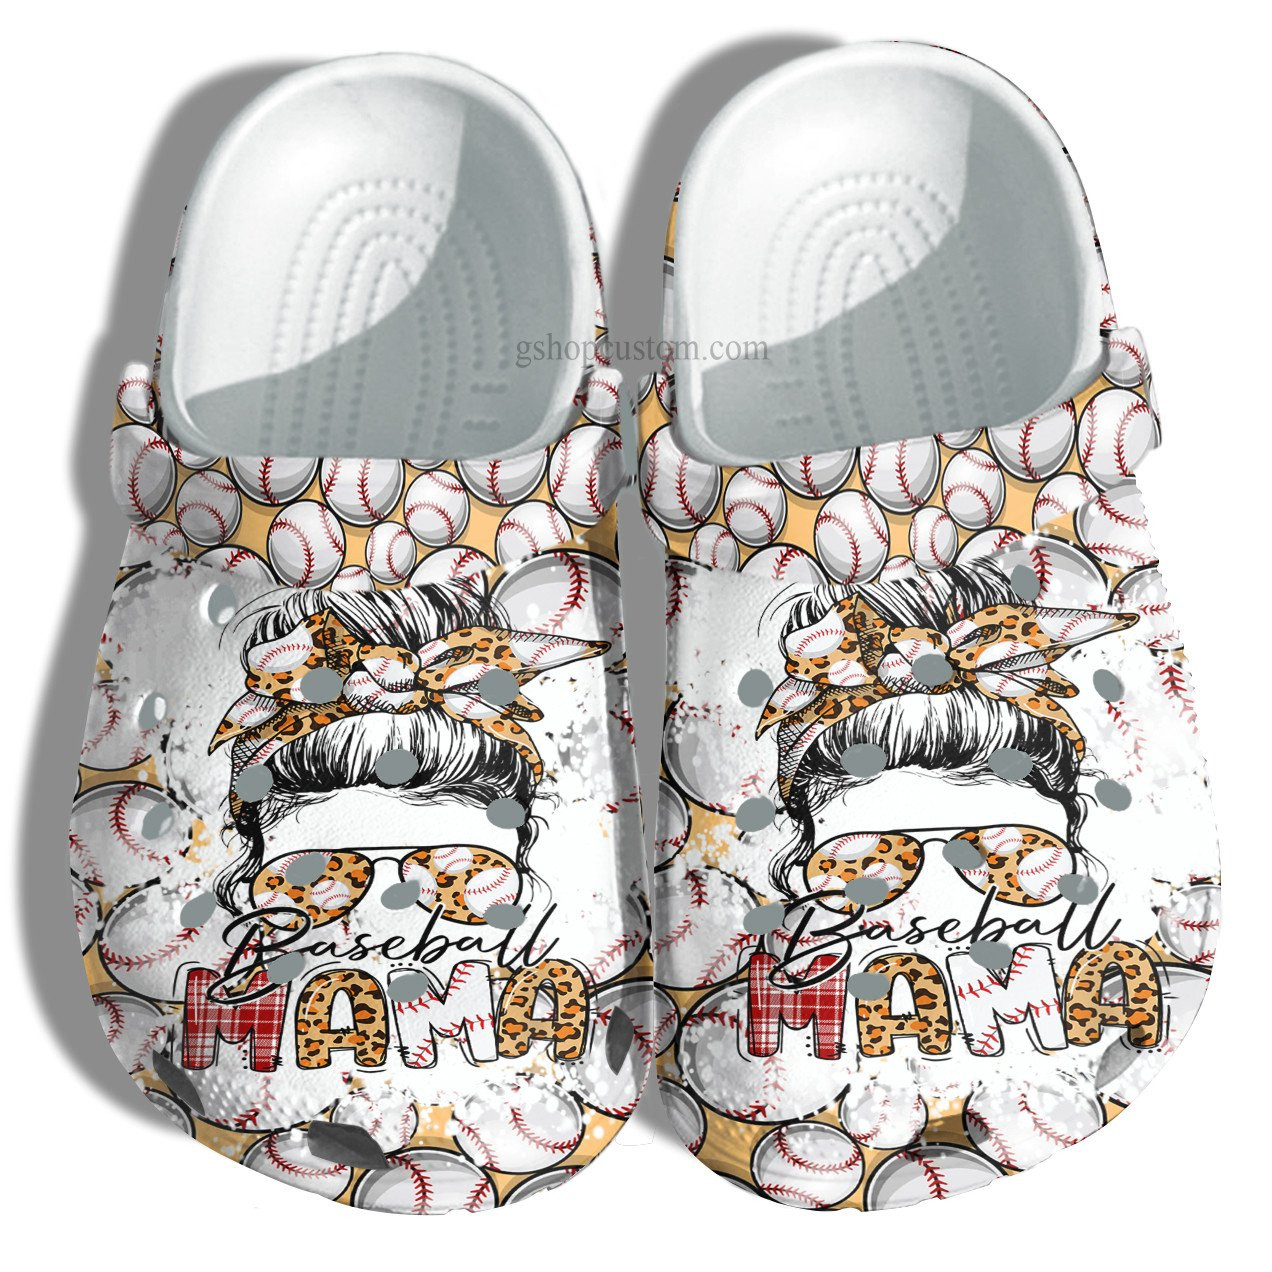 Baseball Mama Leopard Croc Shoes Gift Mother Birthday- Baseball Mom Supporter Son Player Crocs Shoes Gift Women